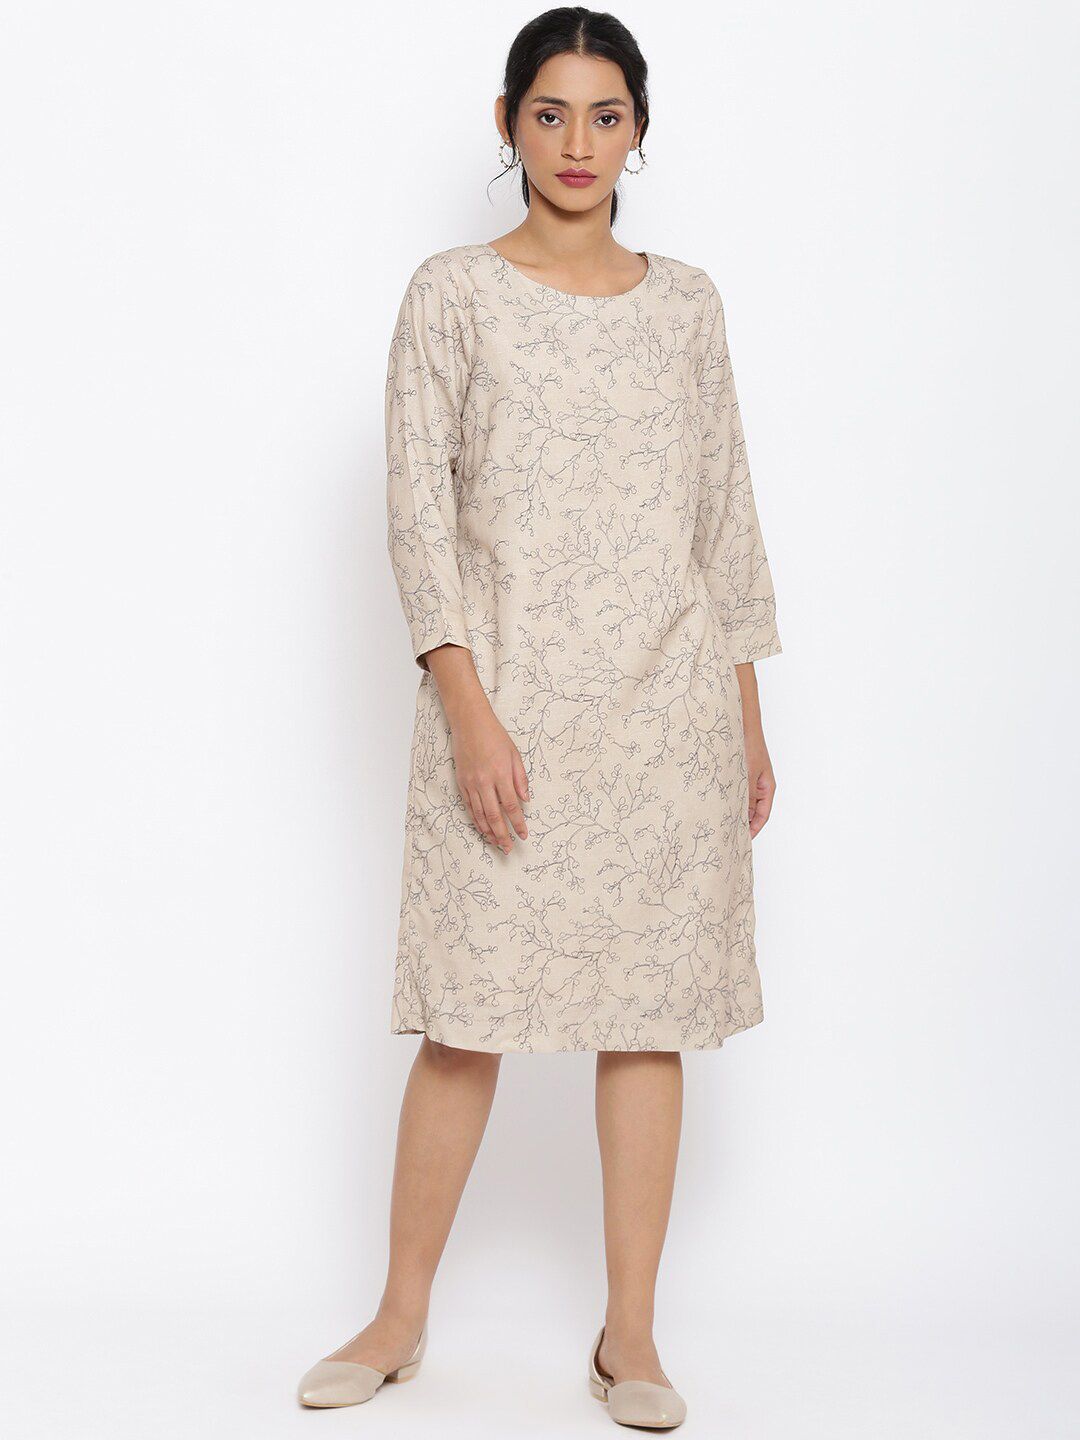 W Women Brown Floral Printed A-Line Dress Price in India